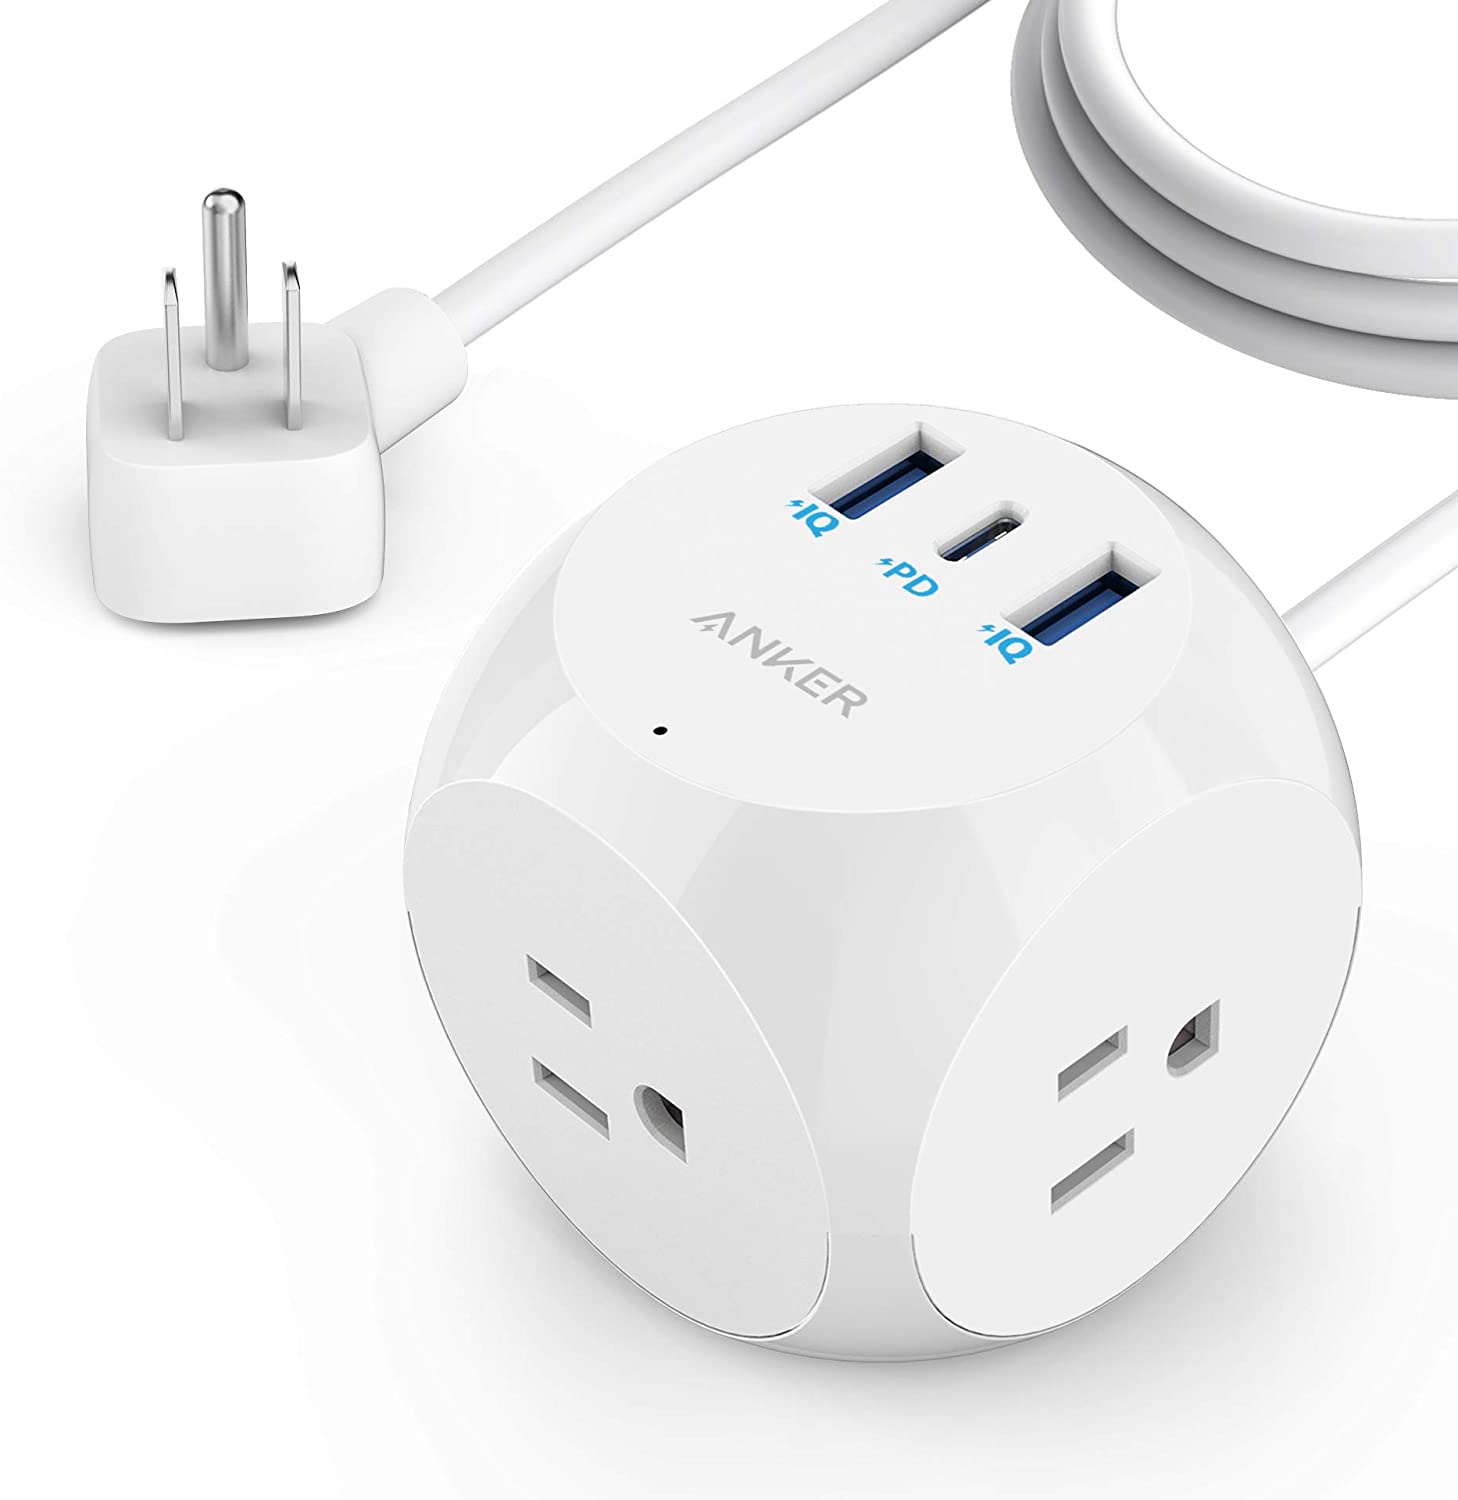 Save 45% OFF on Anker Power Strip with 30W Power Delivery USB C, 3 Outlets and 2 USB Charging Port $21.99